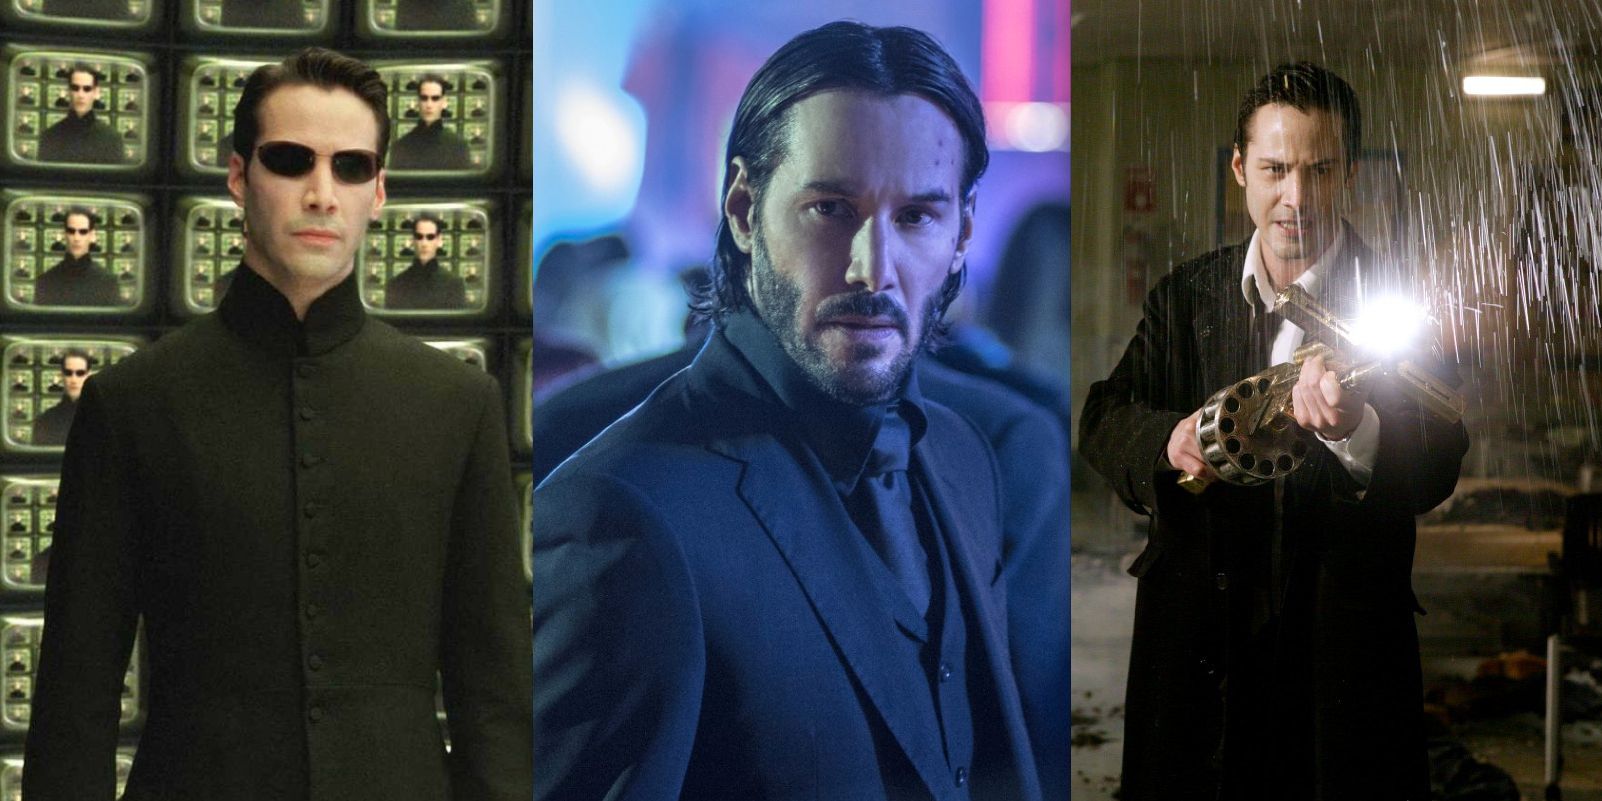 Keanu Reeves as Neo, John Wick and Constantine